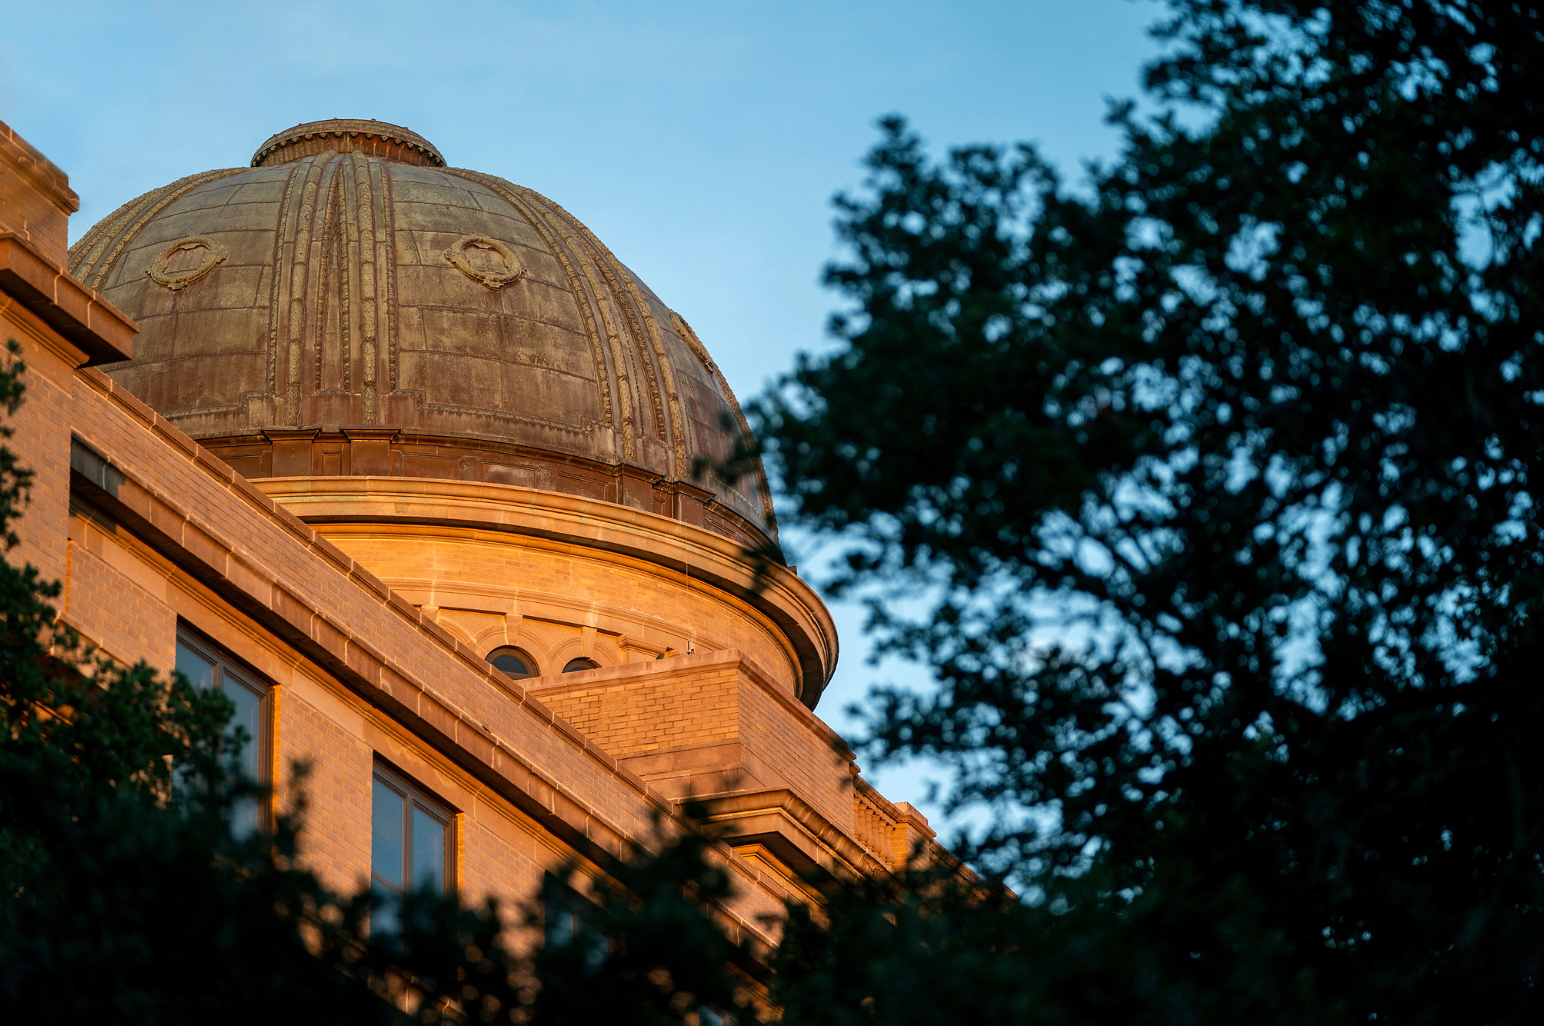 Texas A&M Academic Building Dome, viewed from a distance through trees